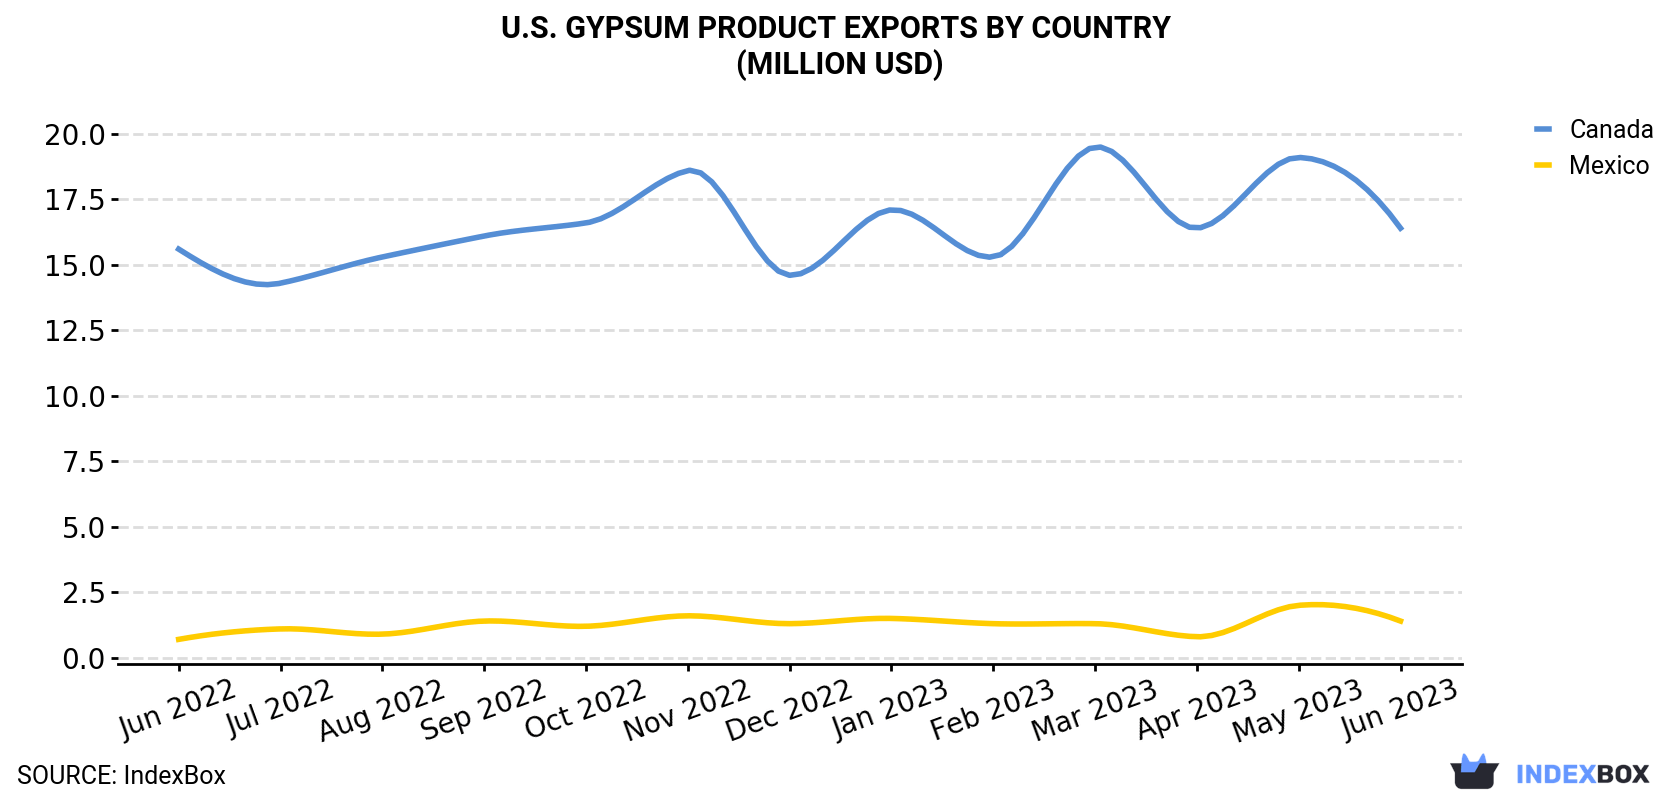 U.S. Gypsum Product Exports By Country (Million USD)